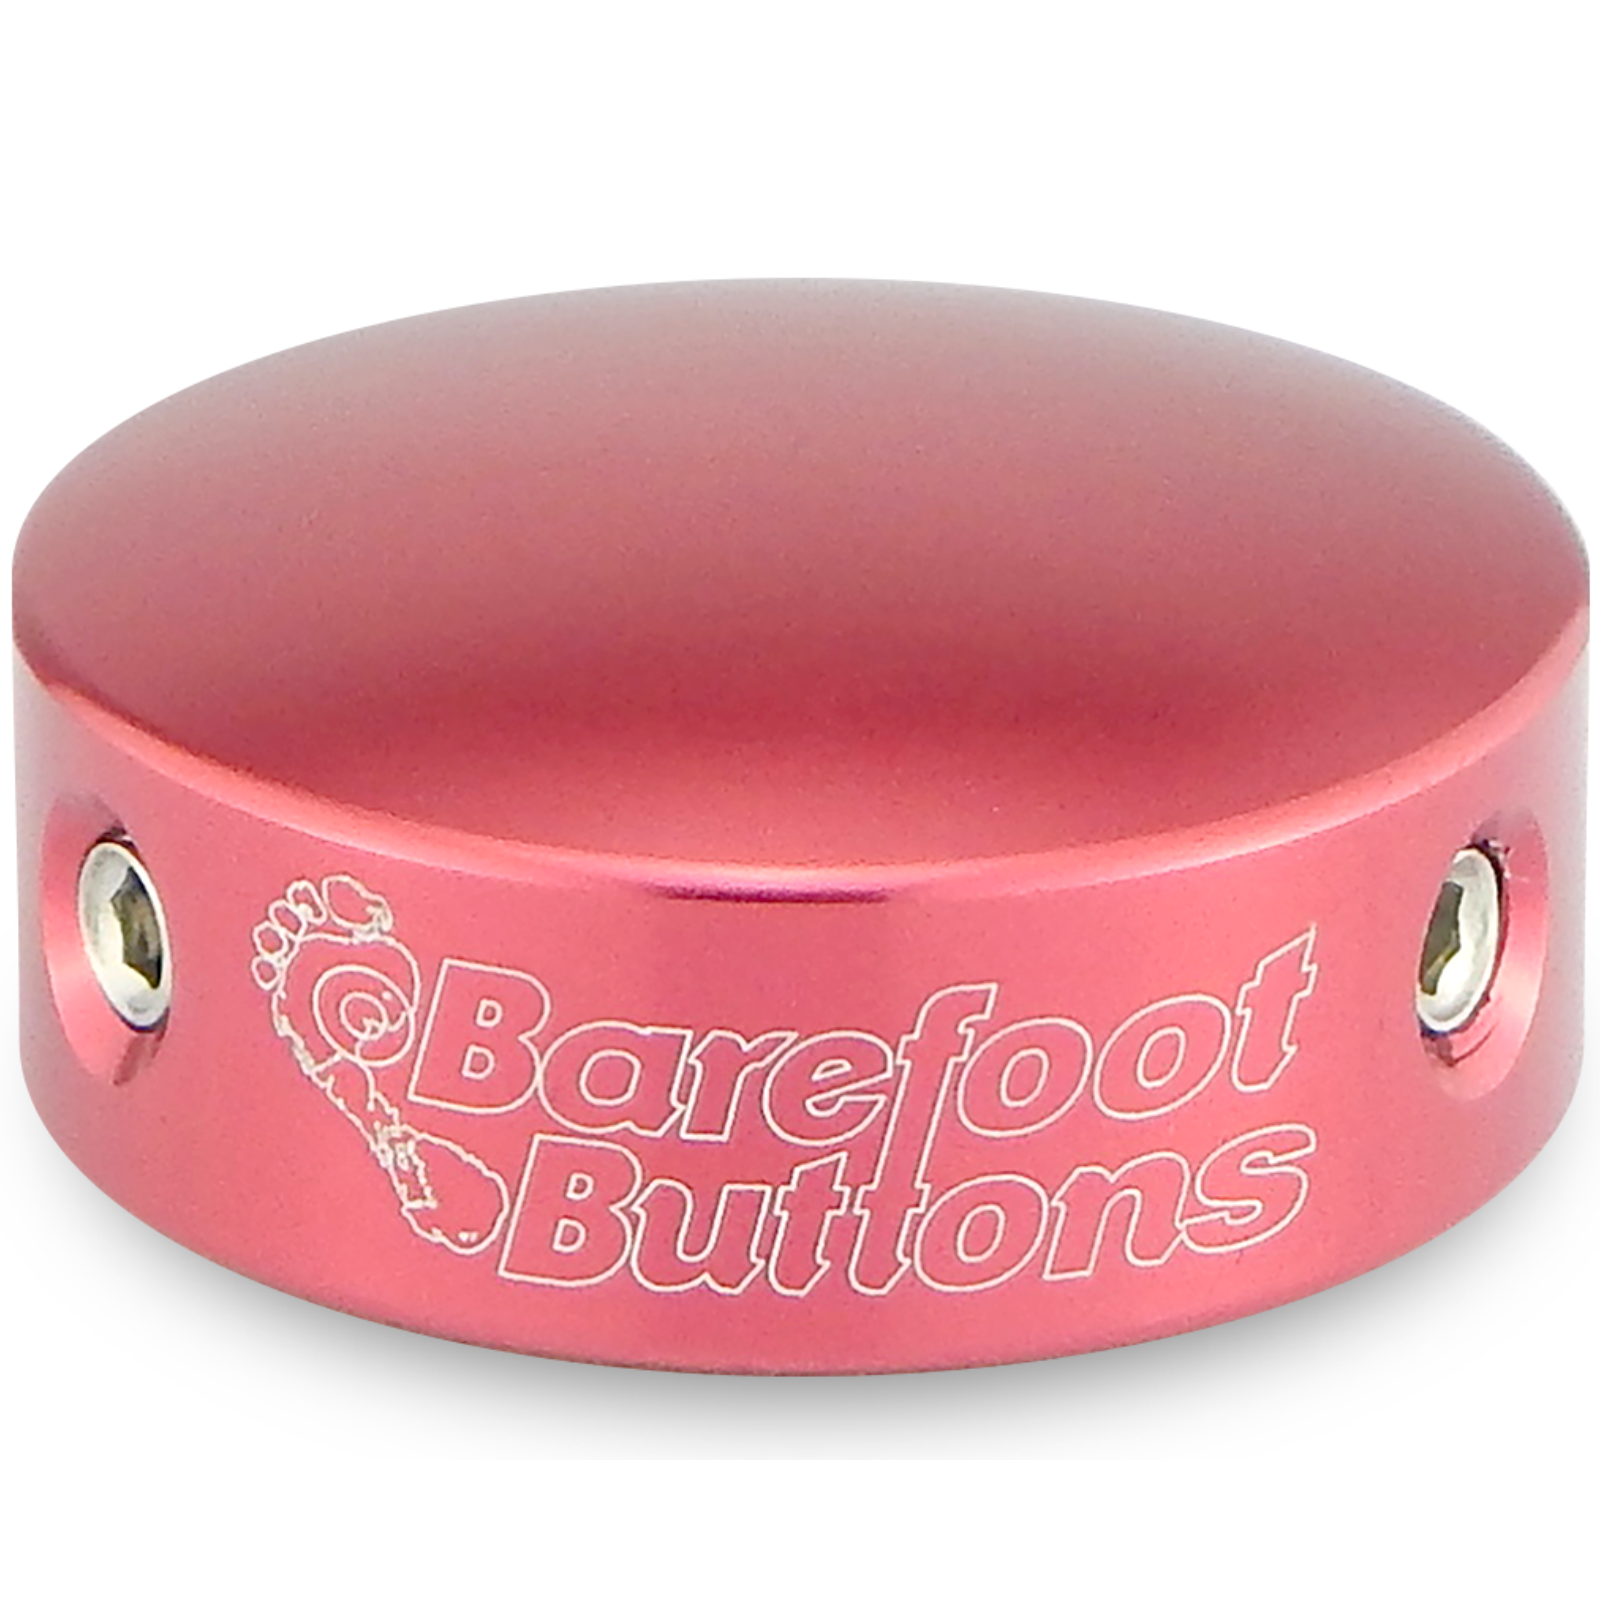 Barefoot Buttons, Barefoot Buttons V2 Standard Footswitch Cap (Red)